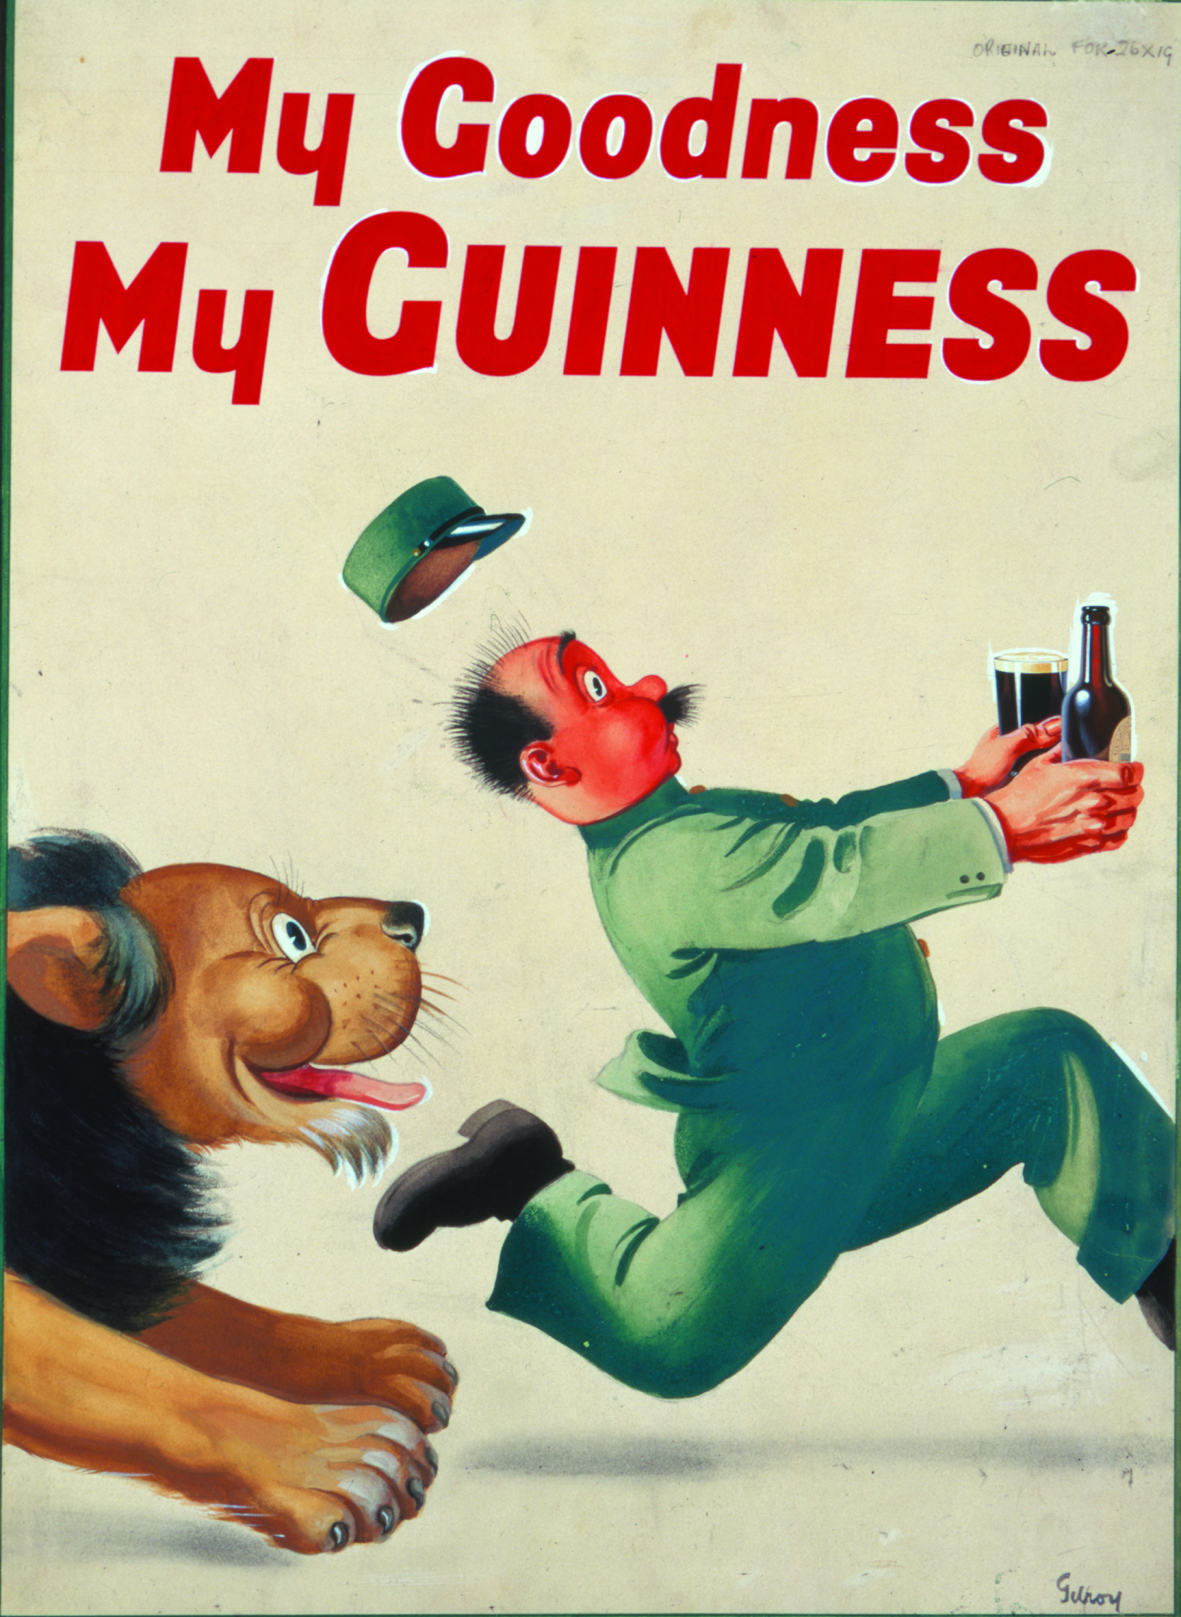 guinness-draught-4-2-can